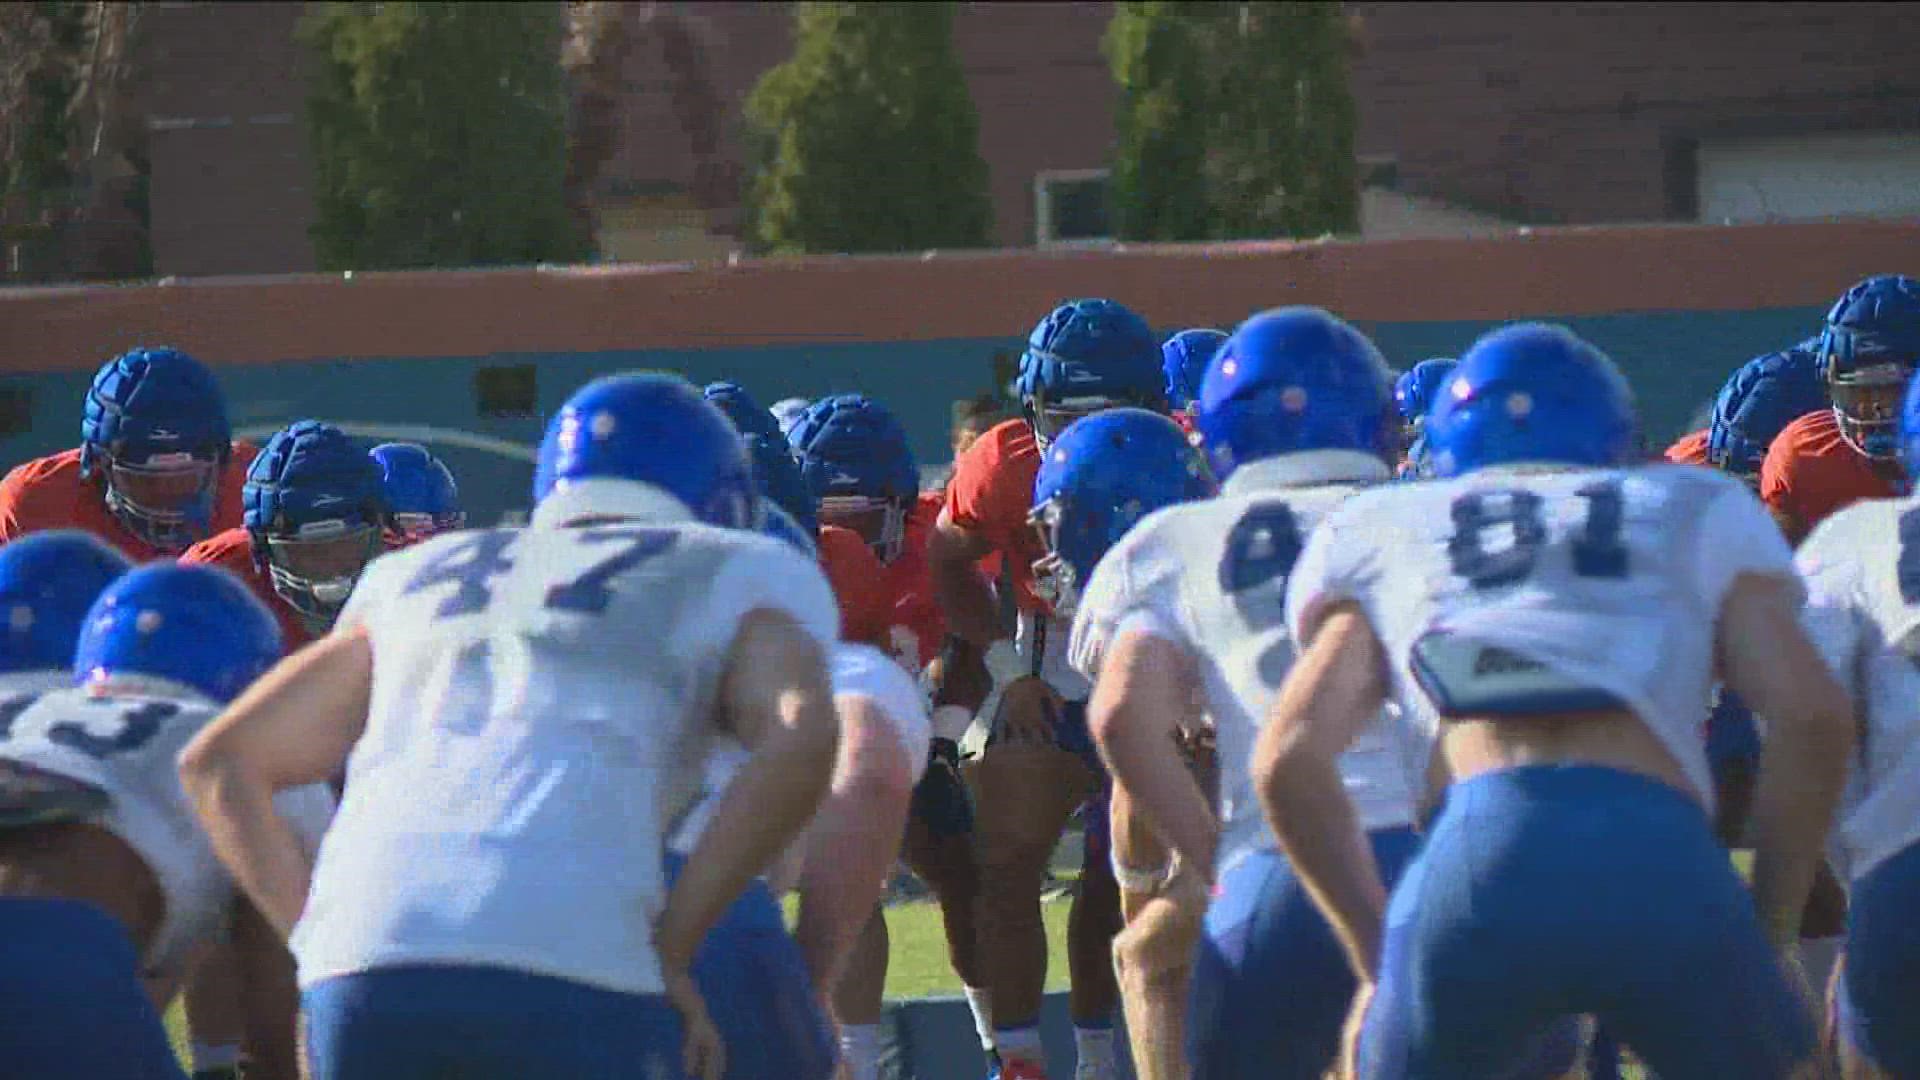 This morning marked BSU's first practice with full pads, suddenly making the season kickoff feel a little closer.